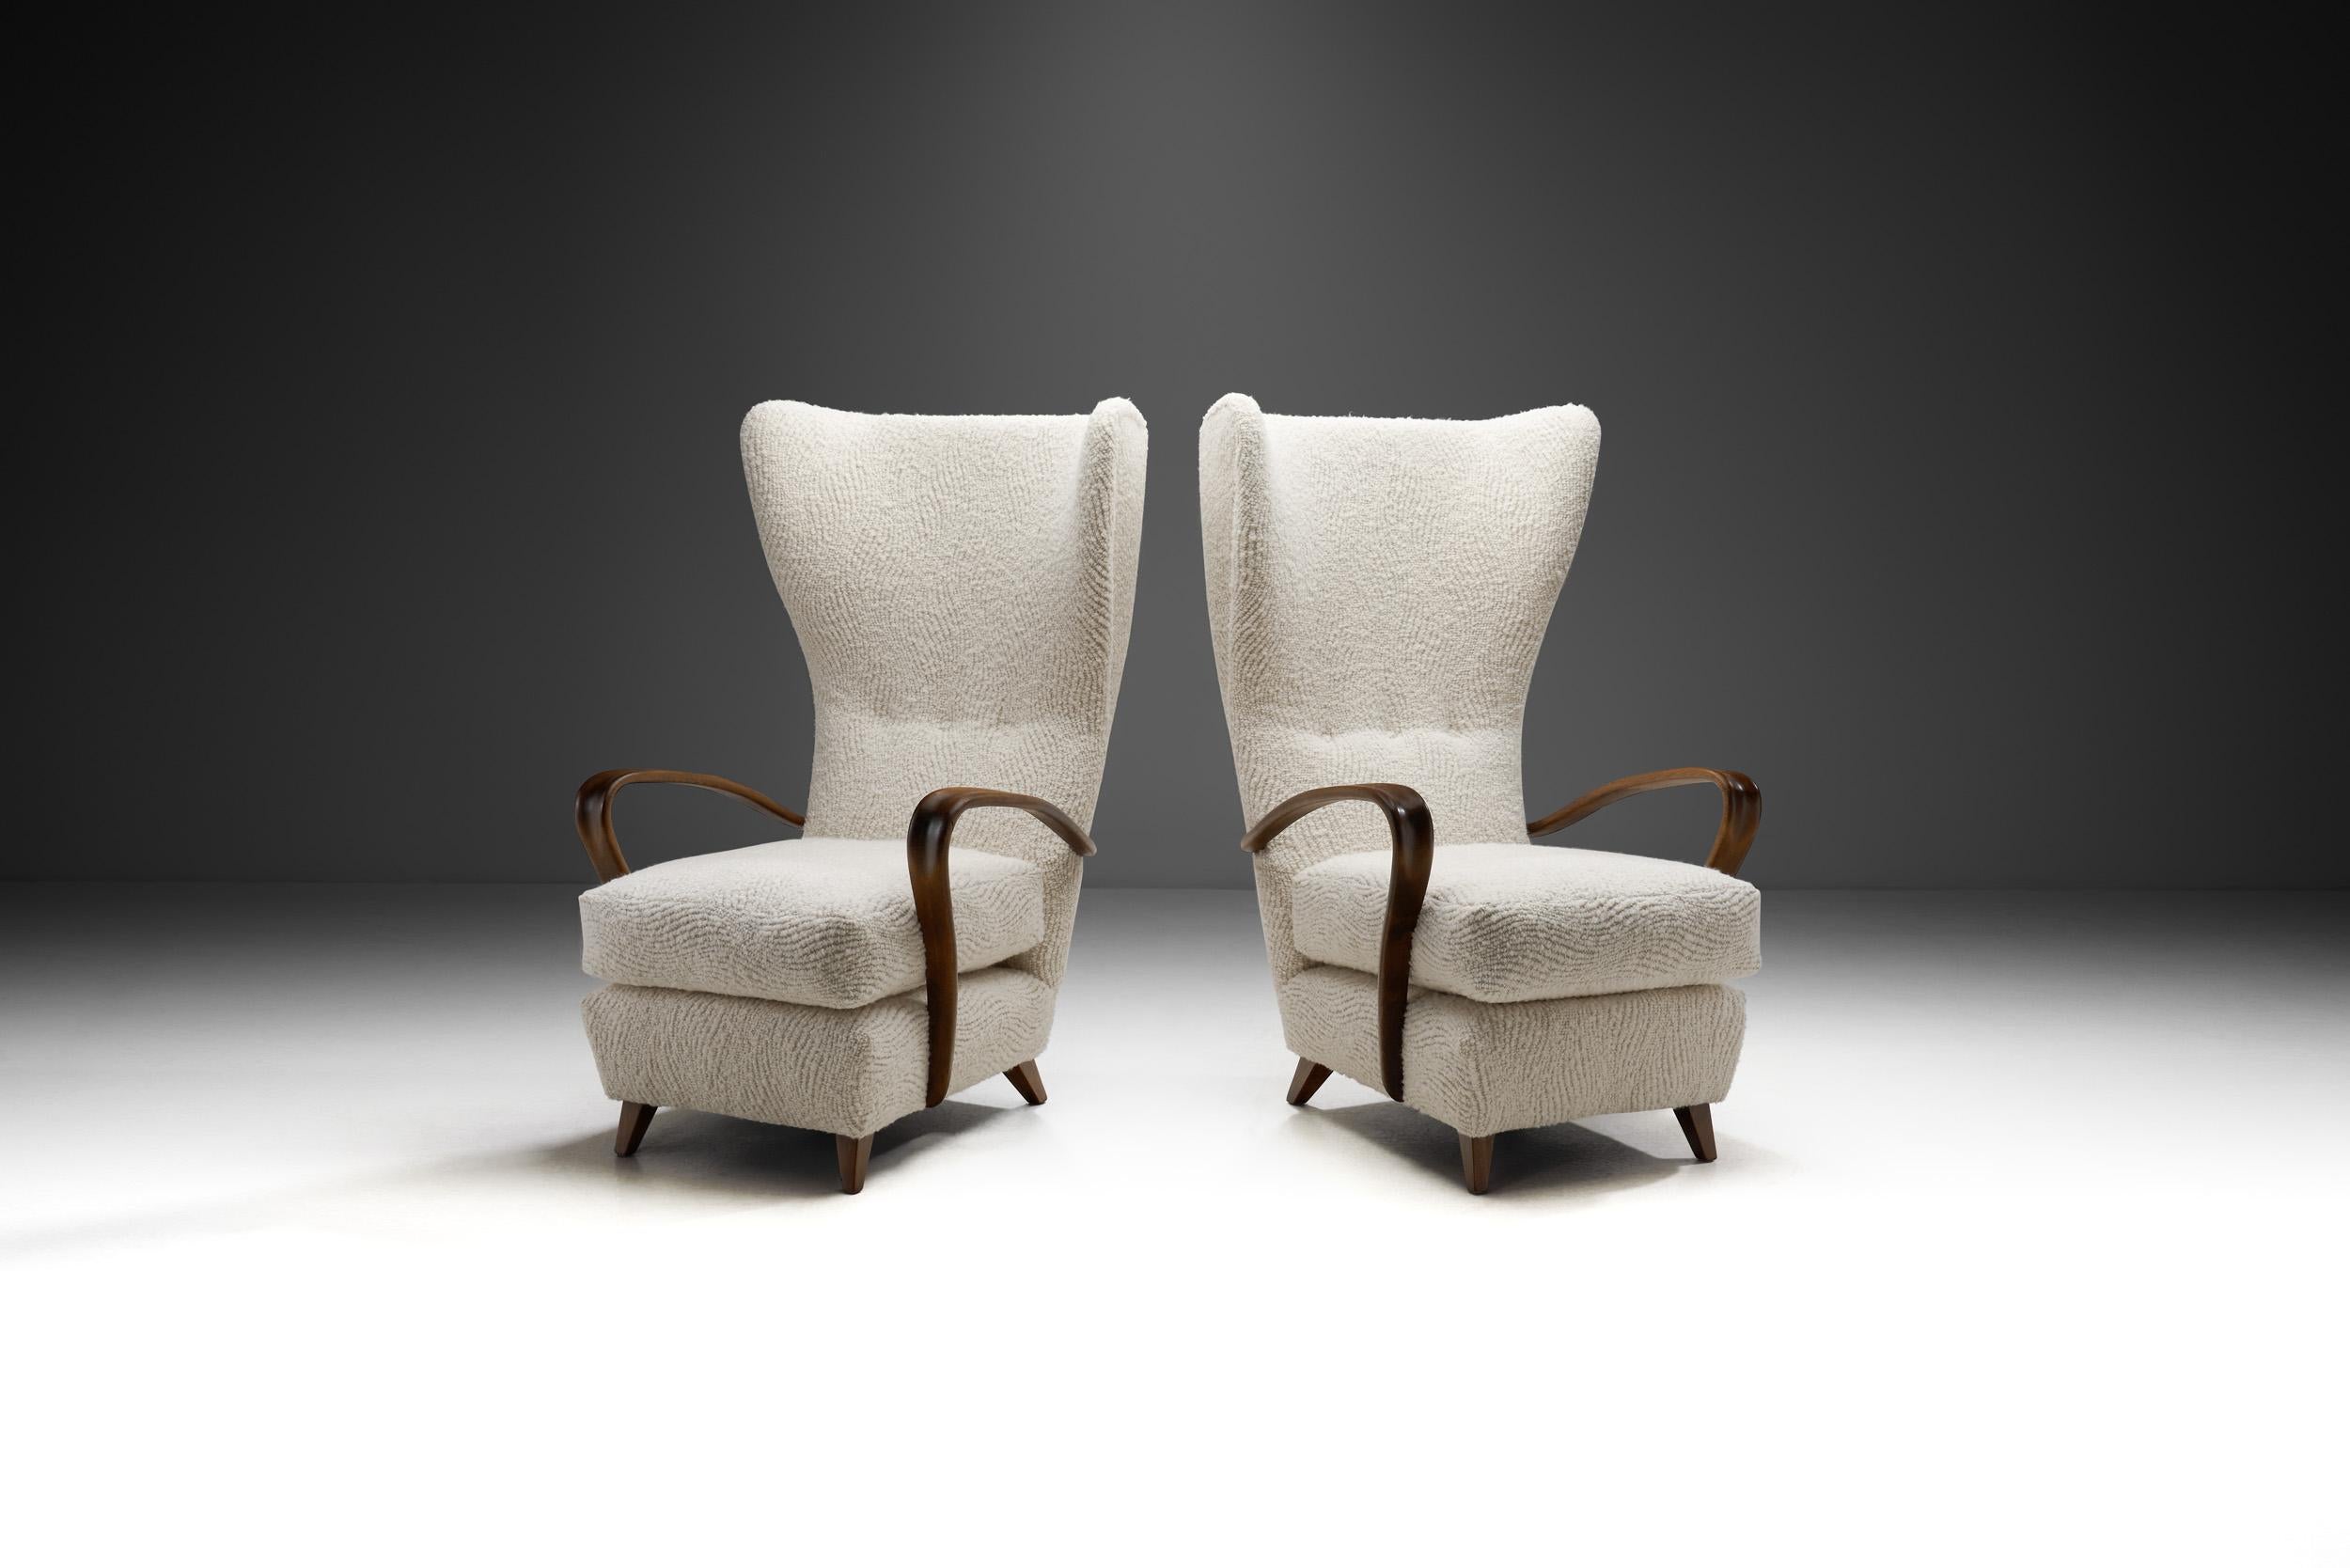 These mid-century modern Italian high-back chairs are exquisite examples of the timeless elegance that defines the era’s design in Italy. Crafted during the peak of the movement, these chairs are a testament to the era's commitment to sleek lines,